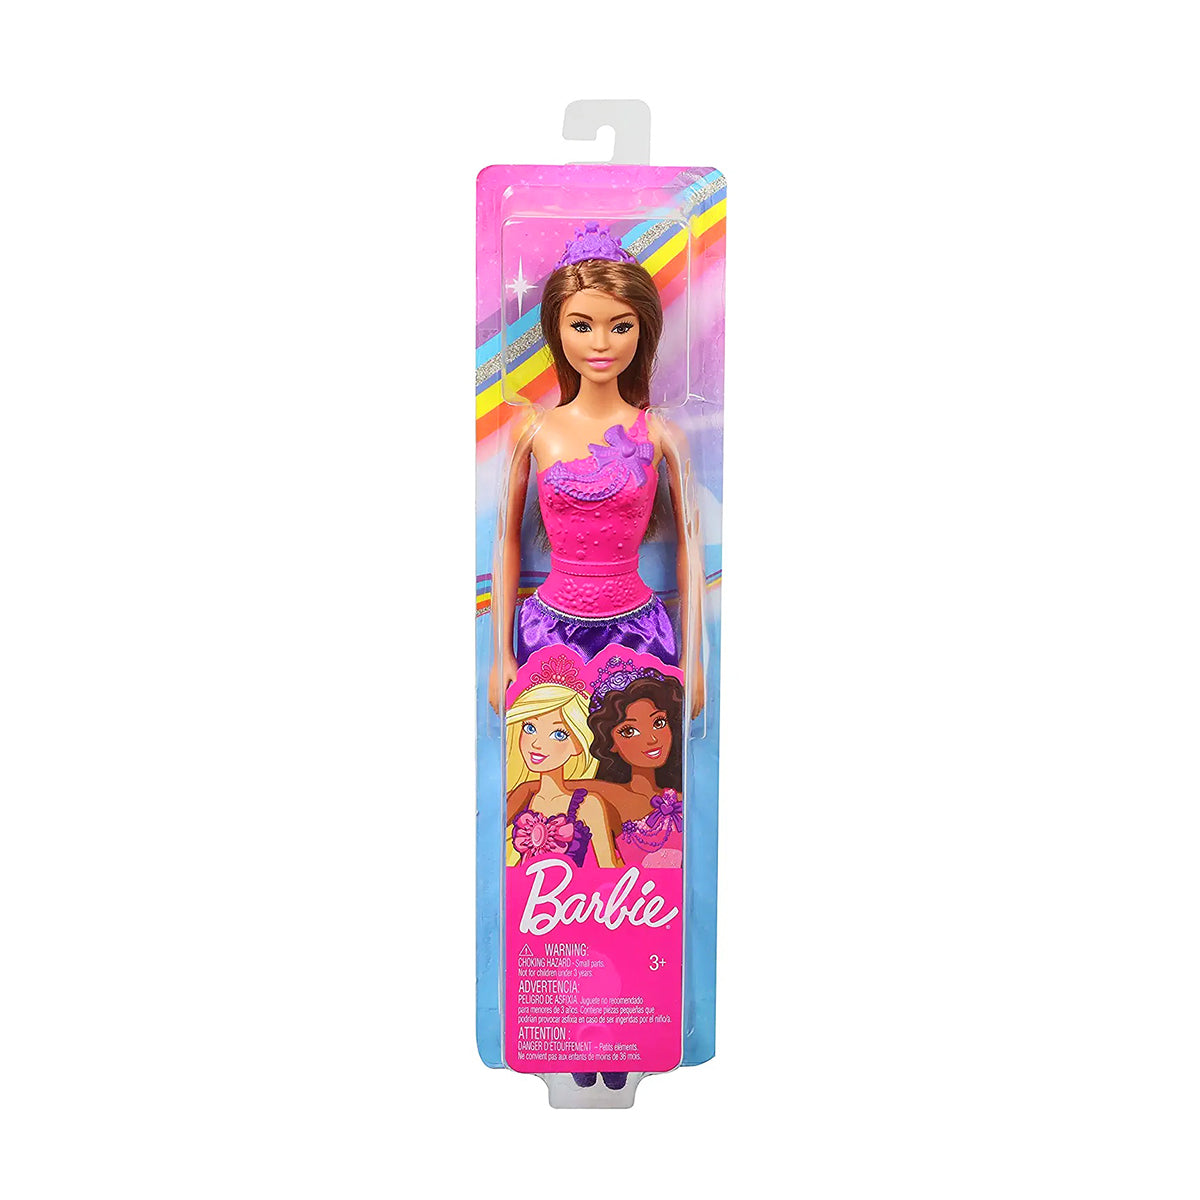 Barbie - Princess Doll (Styles Vary - One Supplied)